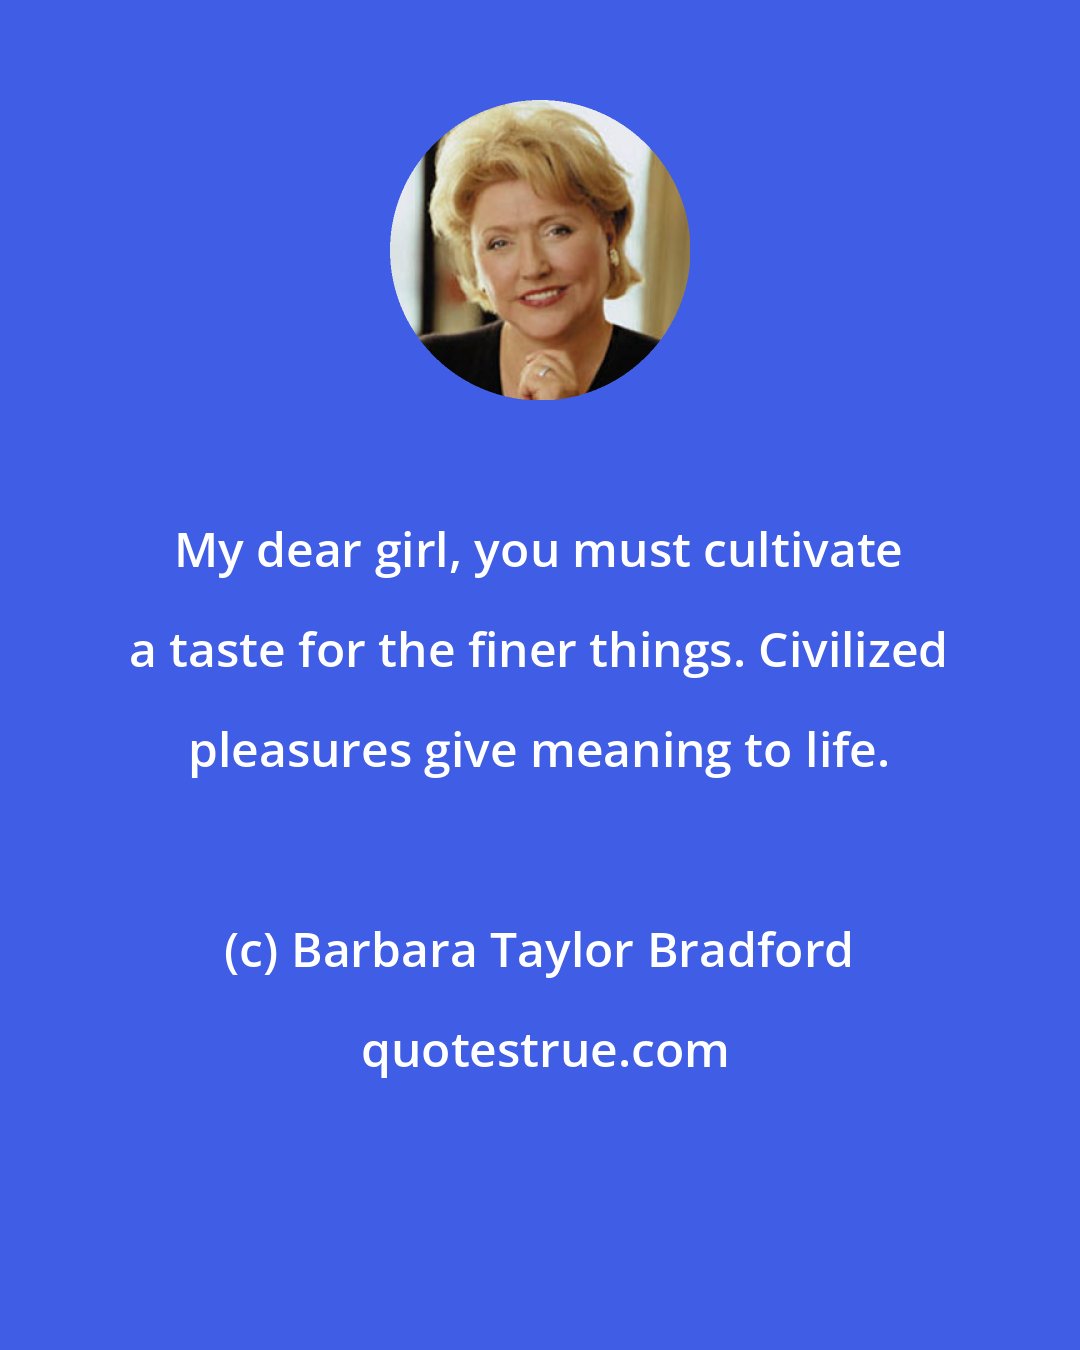 Barbara Taylor Bradford: My dear girl, you must cultivate a taste for the finer things. Civilized pleasures give meaning to life.